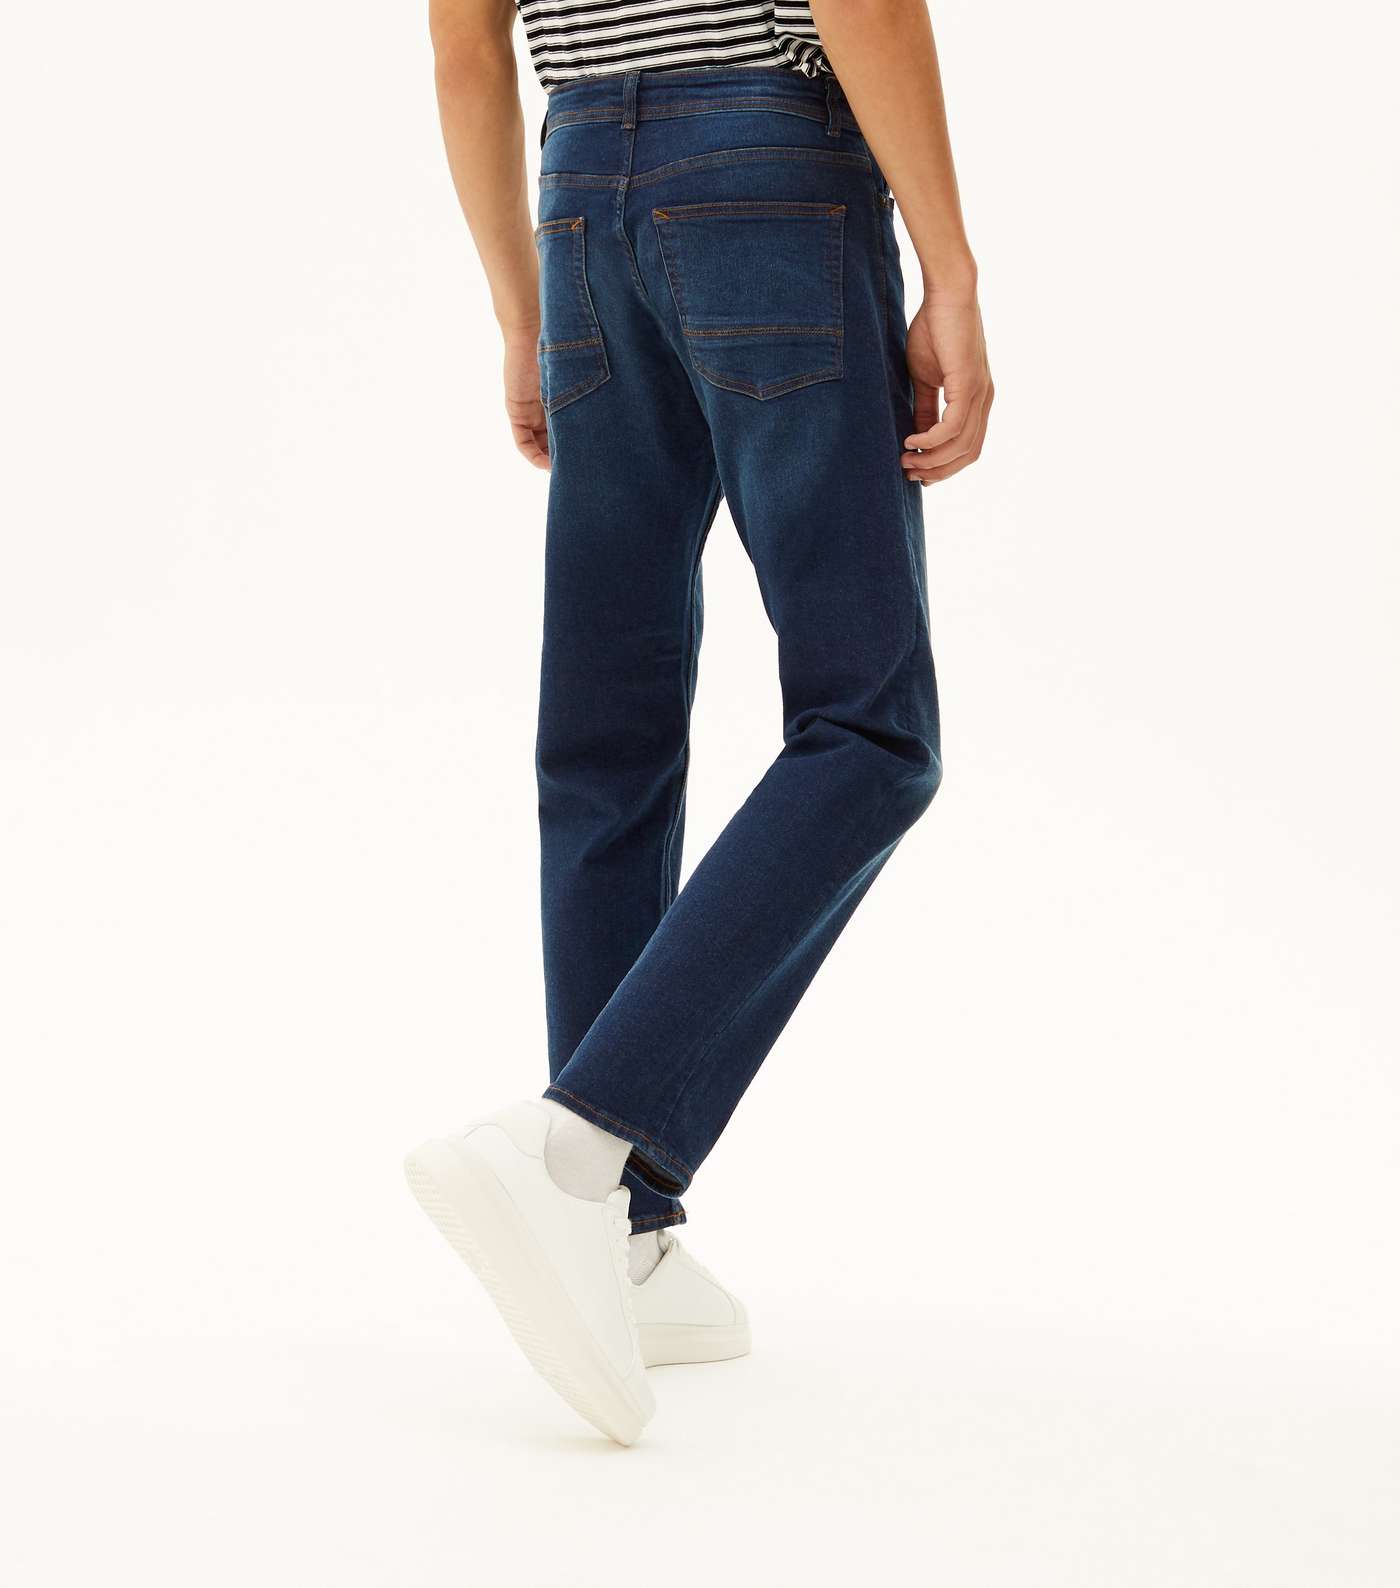 Navy Rinse Wash Straight Fit Jeans Image 5